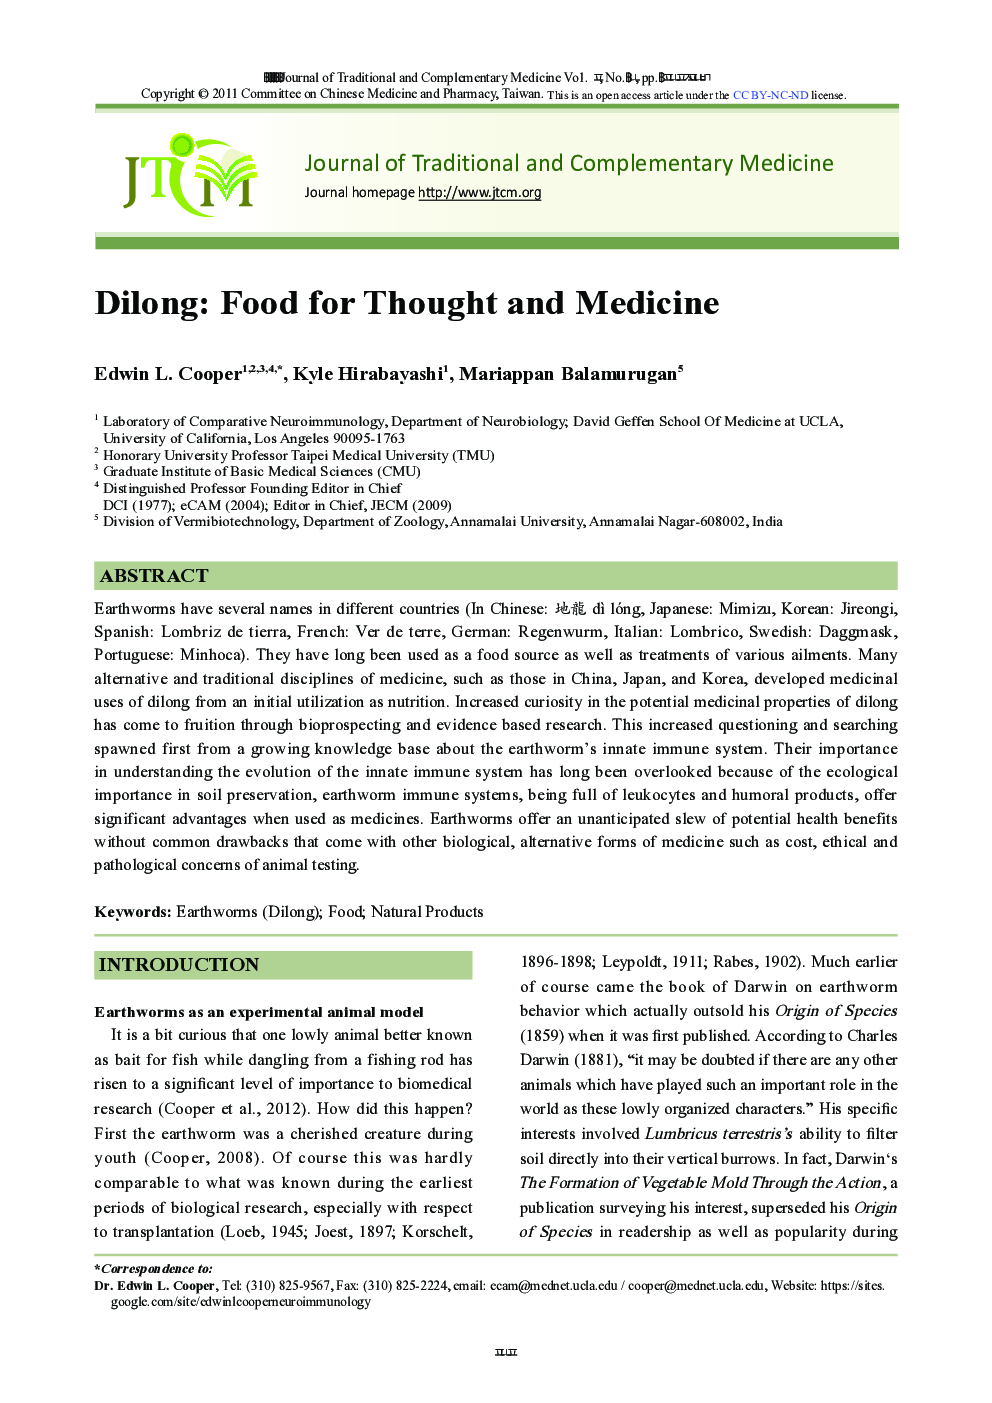 Dilong: Food for Thought and Medicine